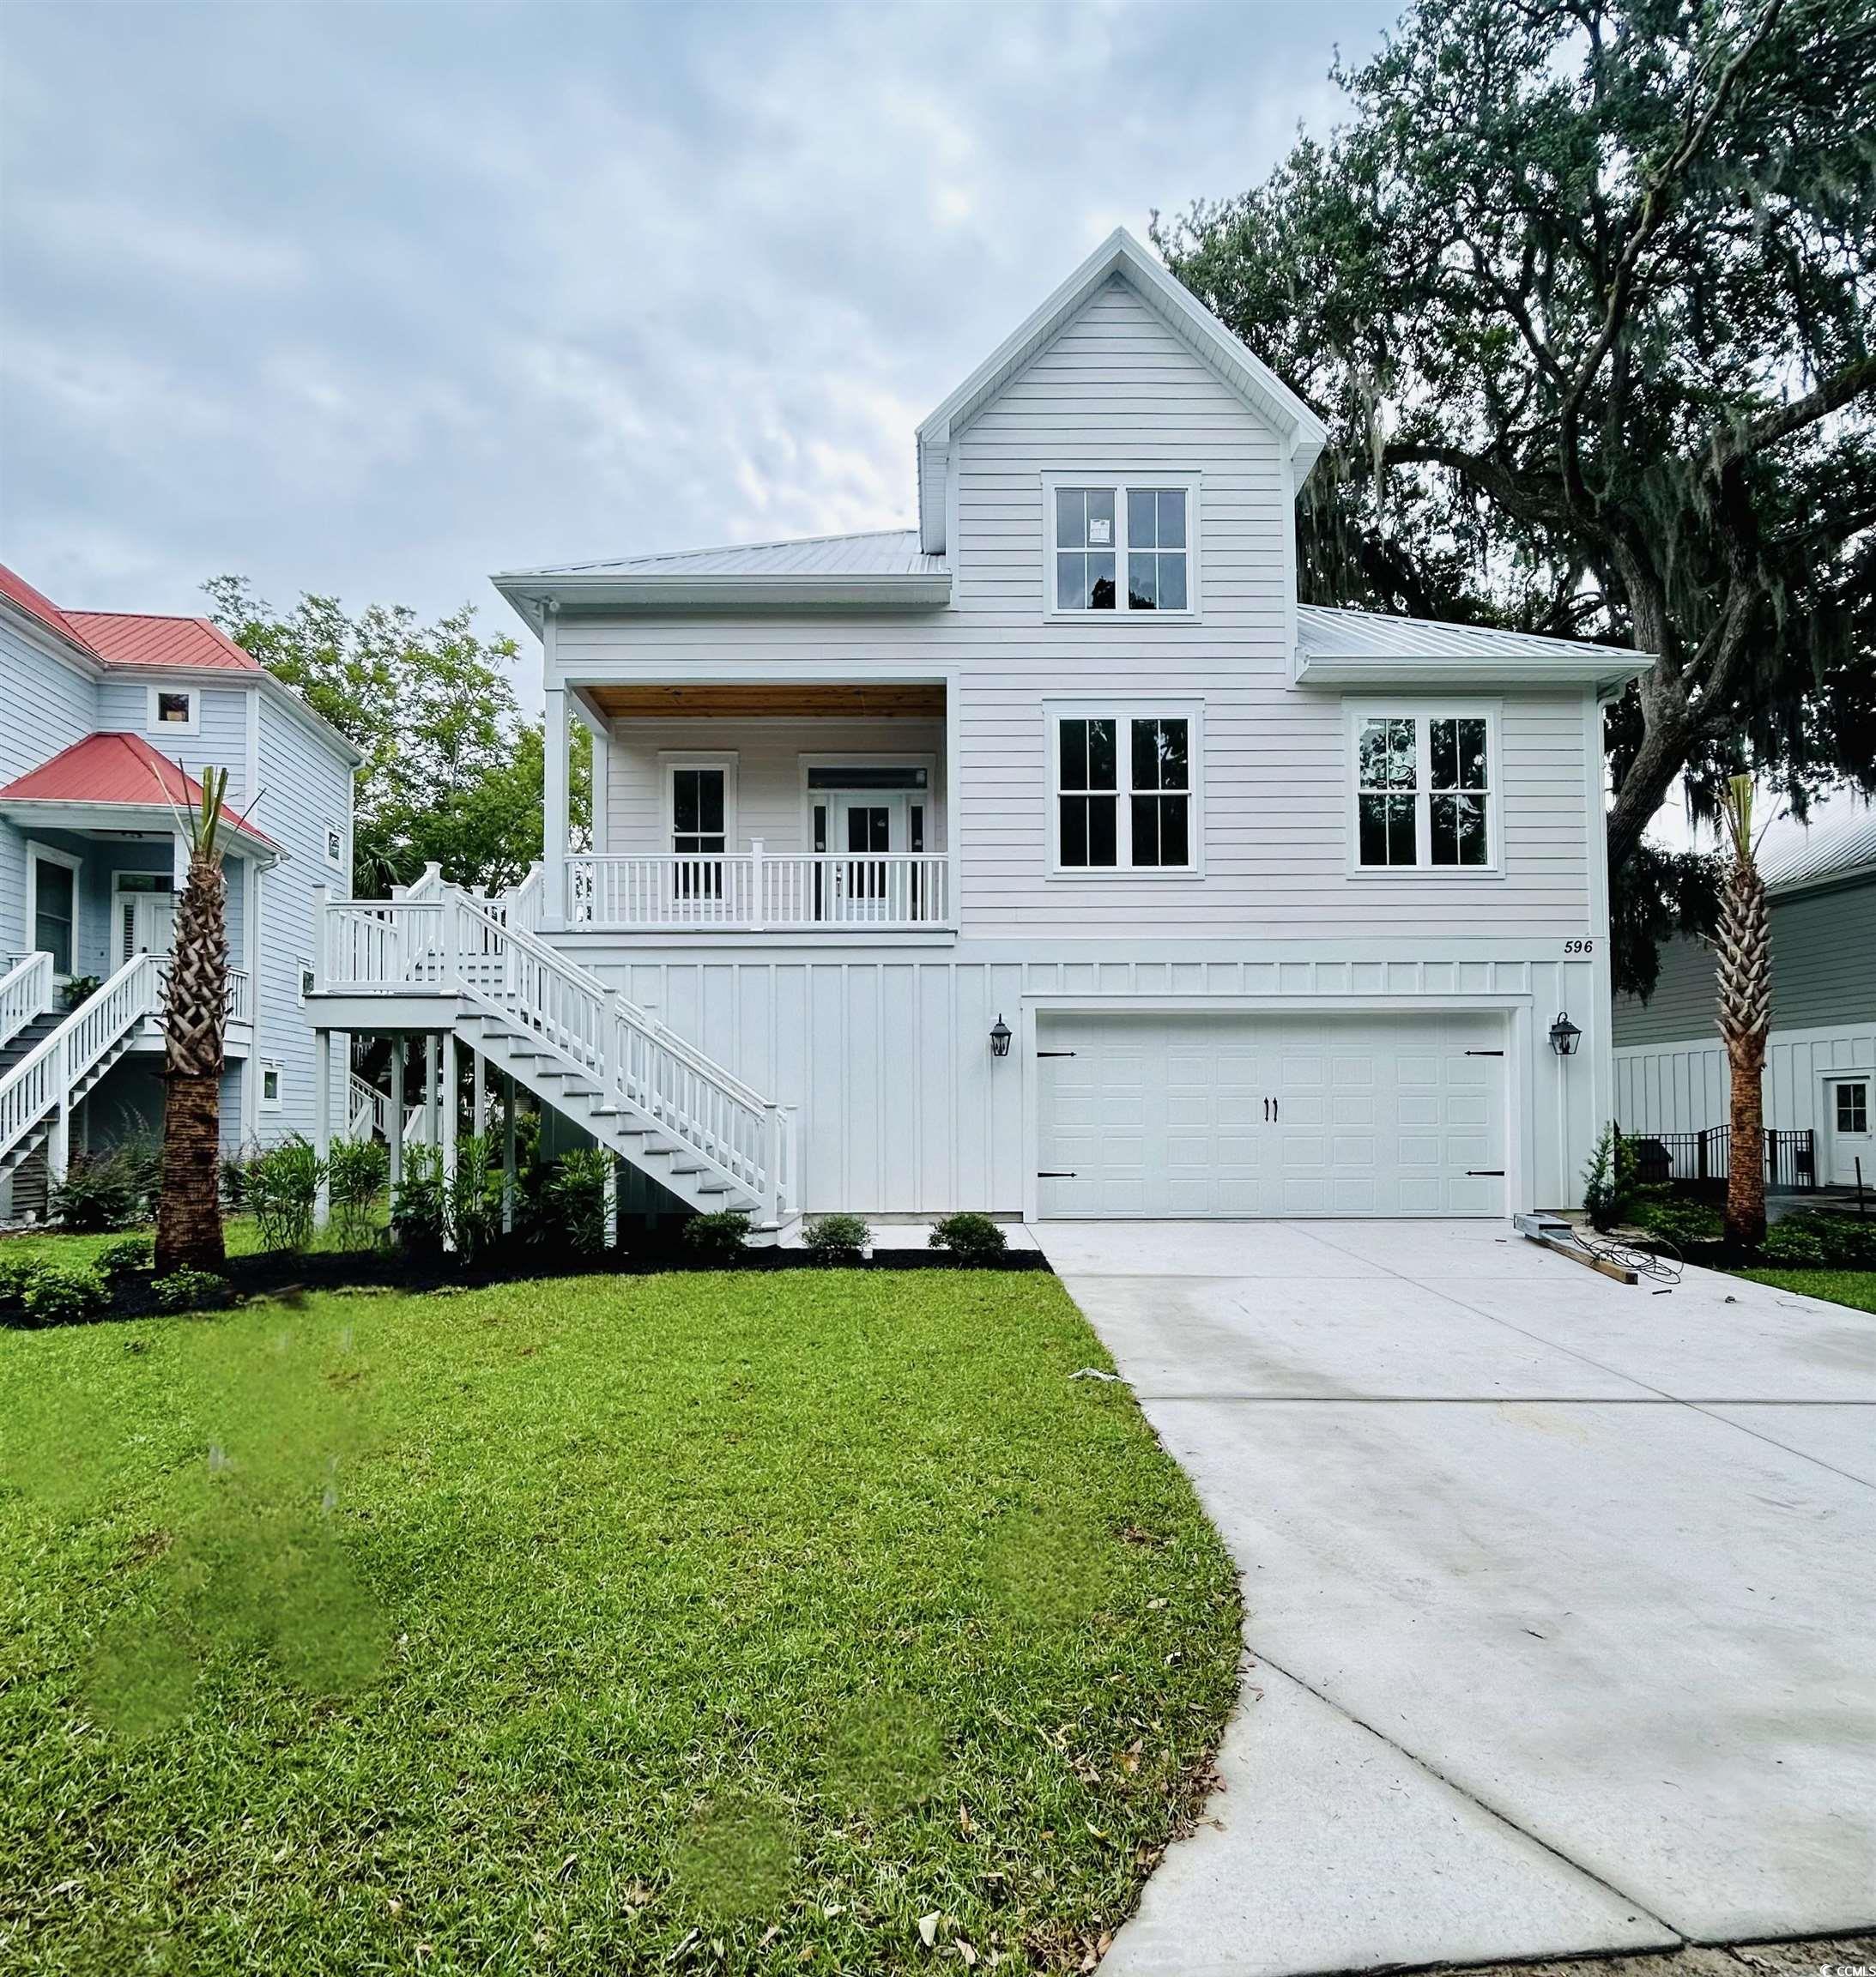 596 Collins Ave. Murrells Inlet, SC 29576